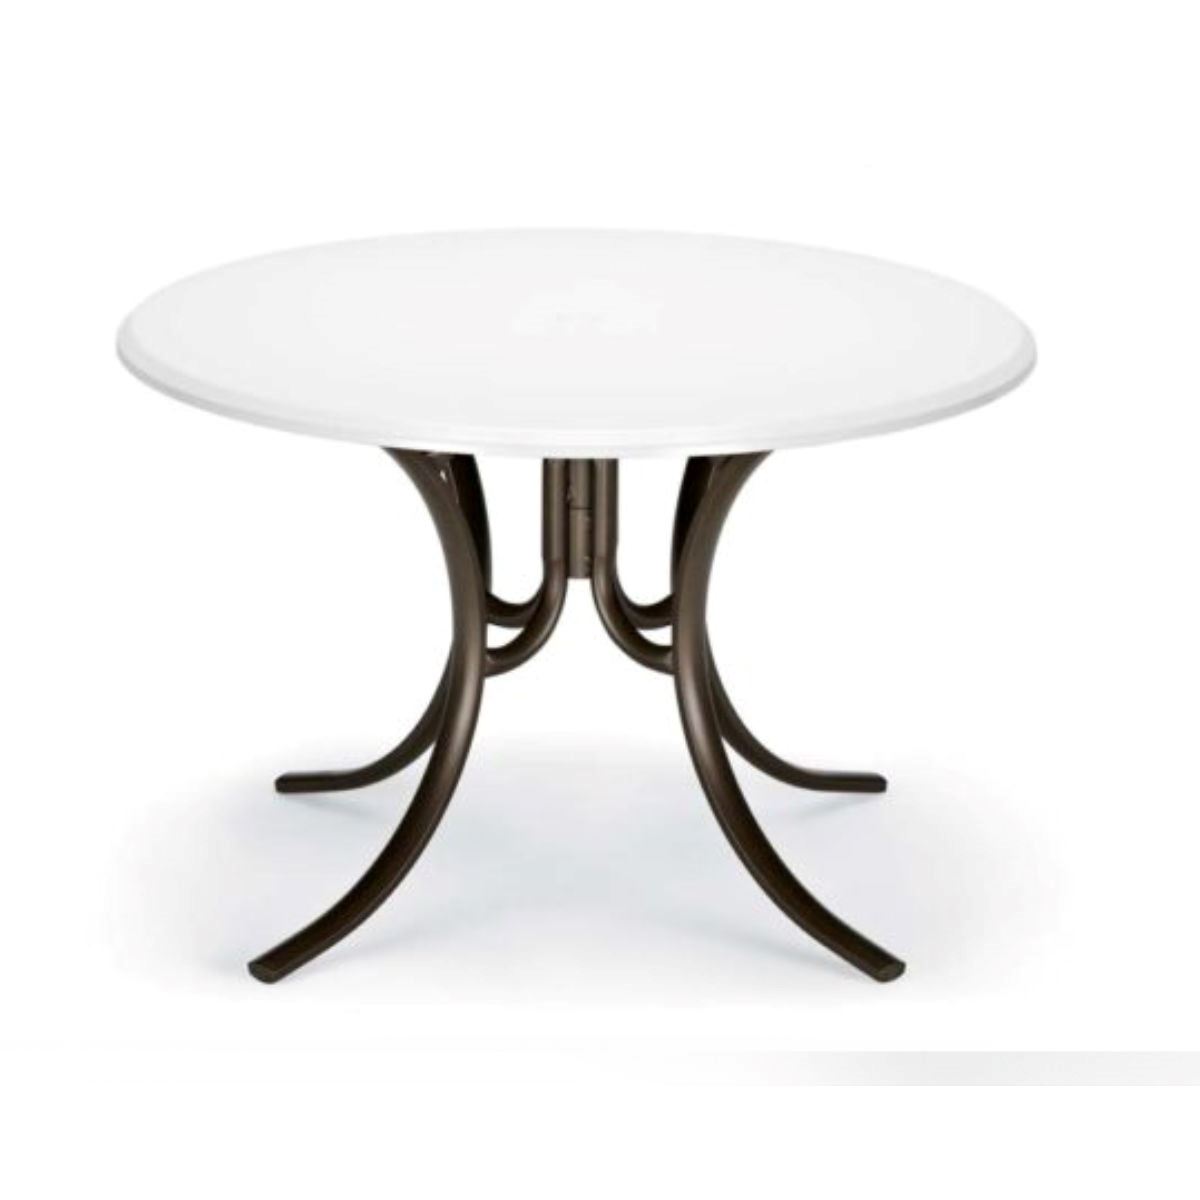 Dining Table 42 Inch Round Werzalit, 42 Inch Round Dining Tables